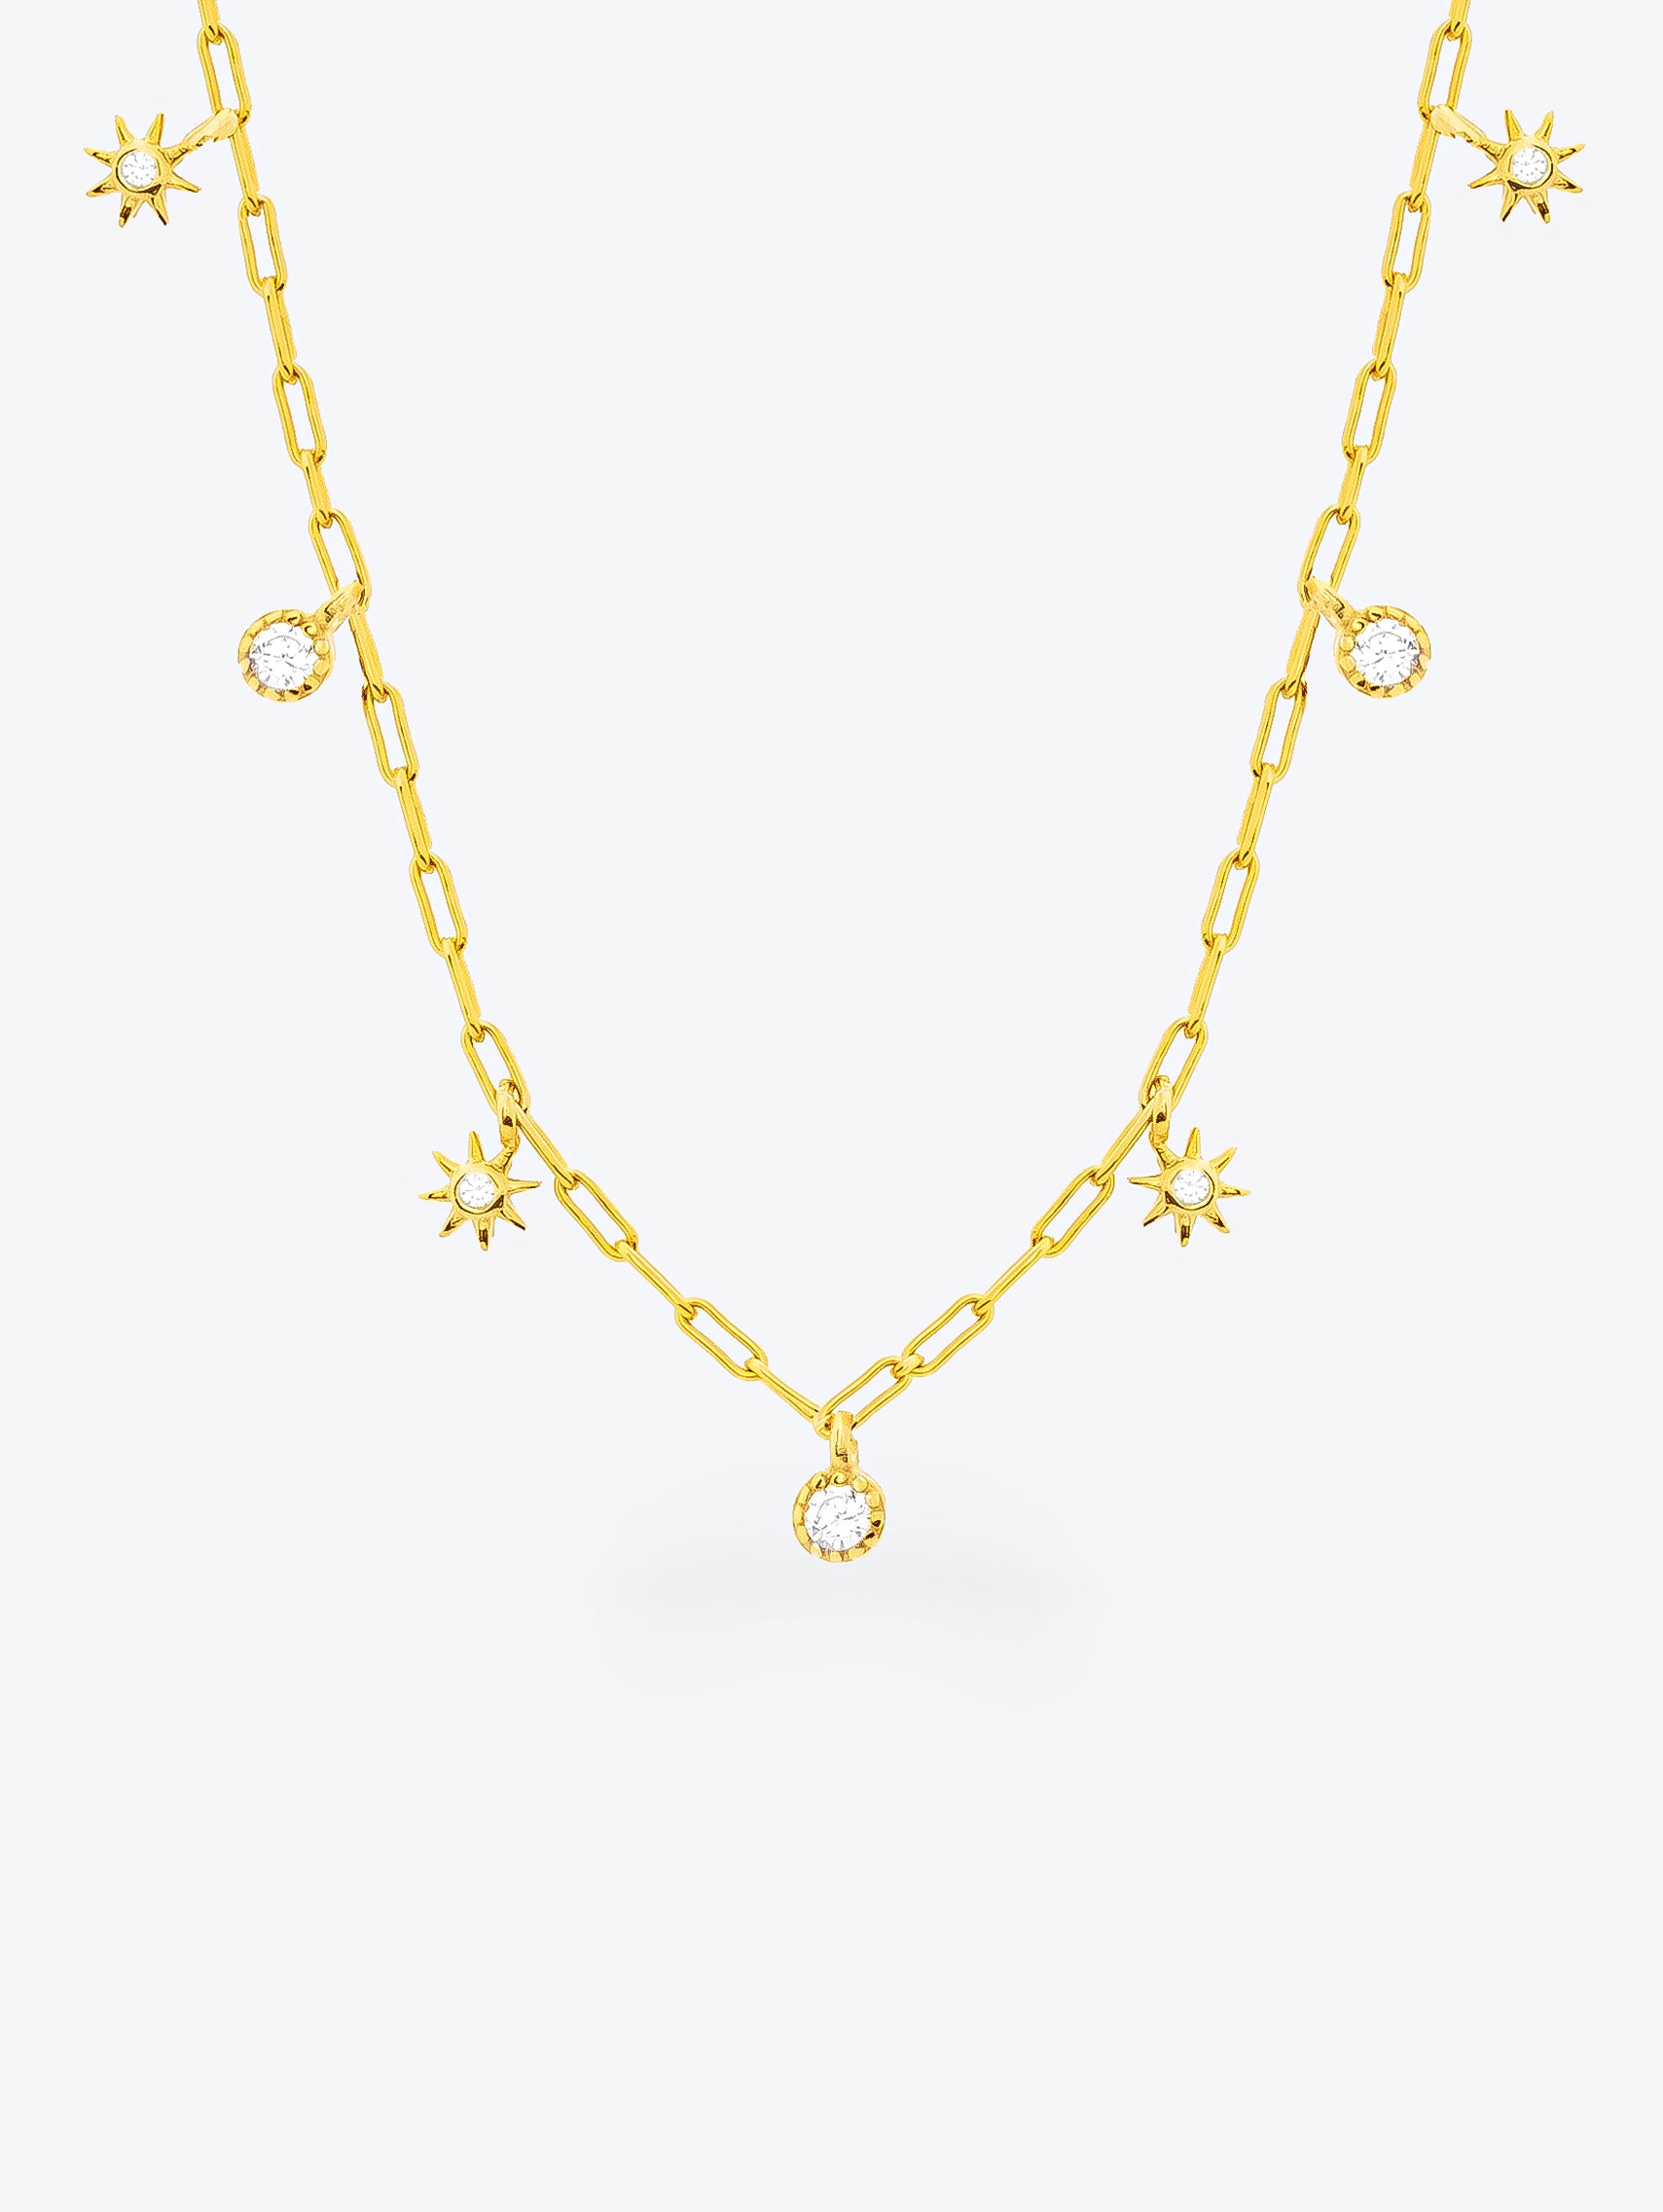 Gold Charm Choker Necklace - Moon and Star